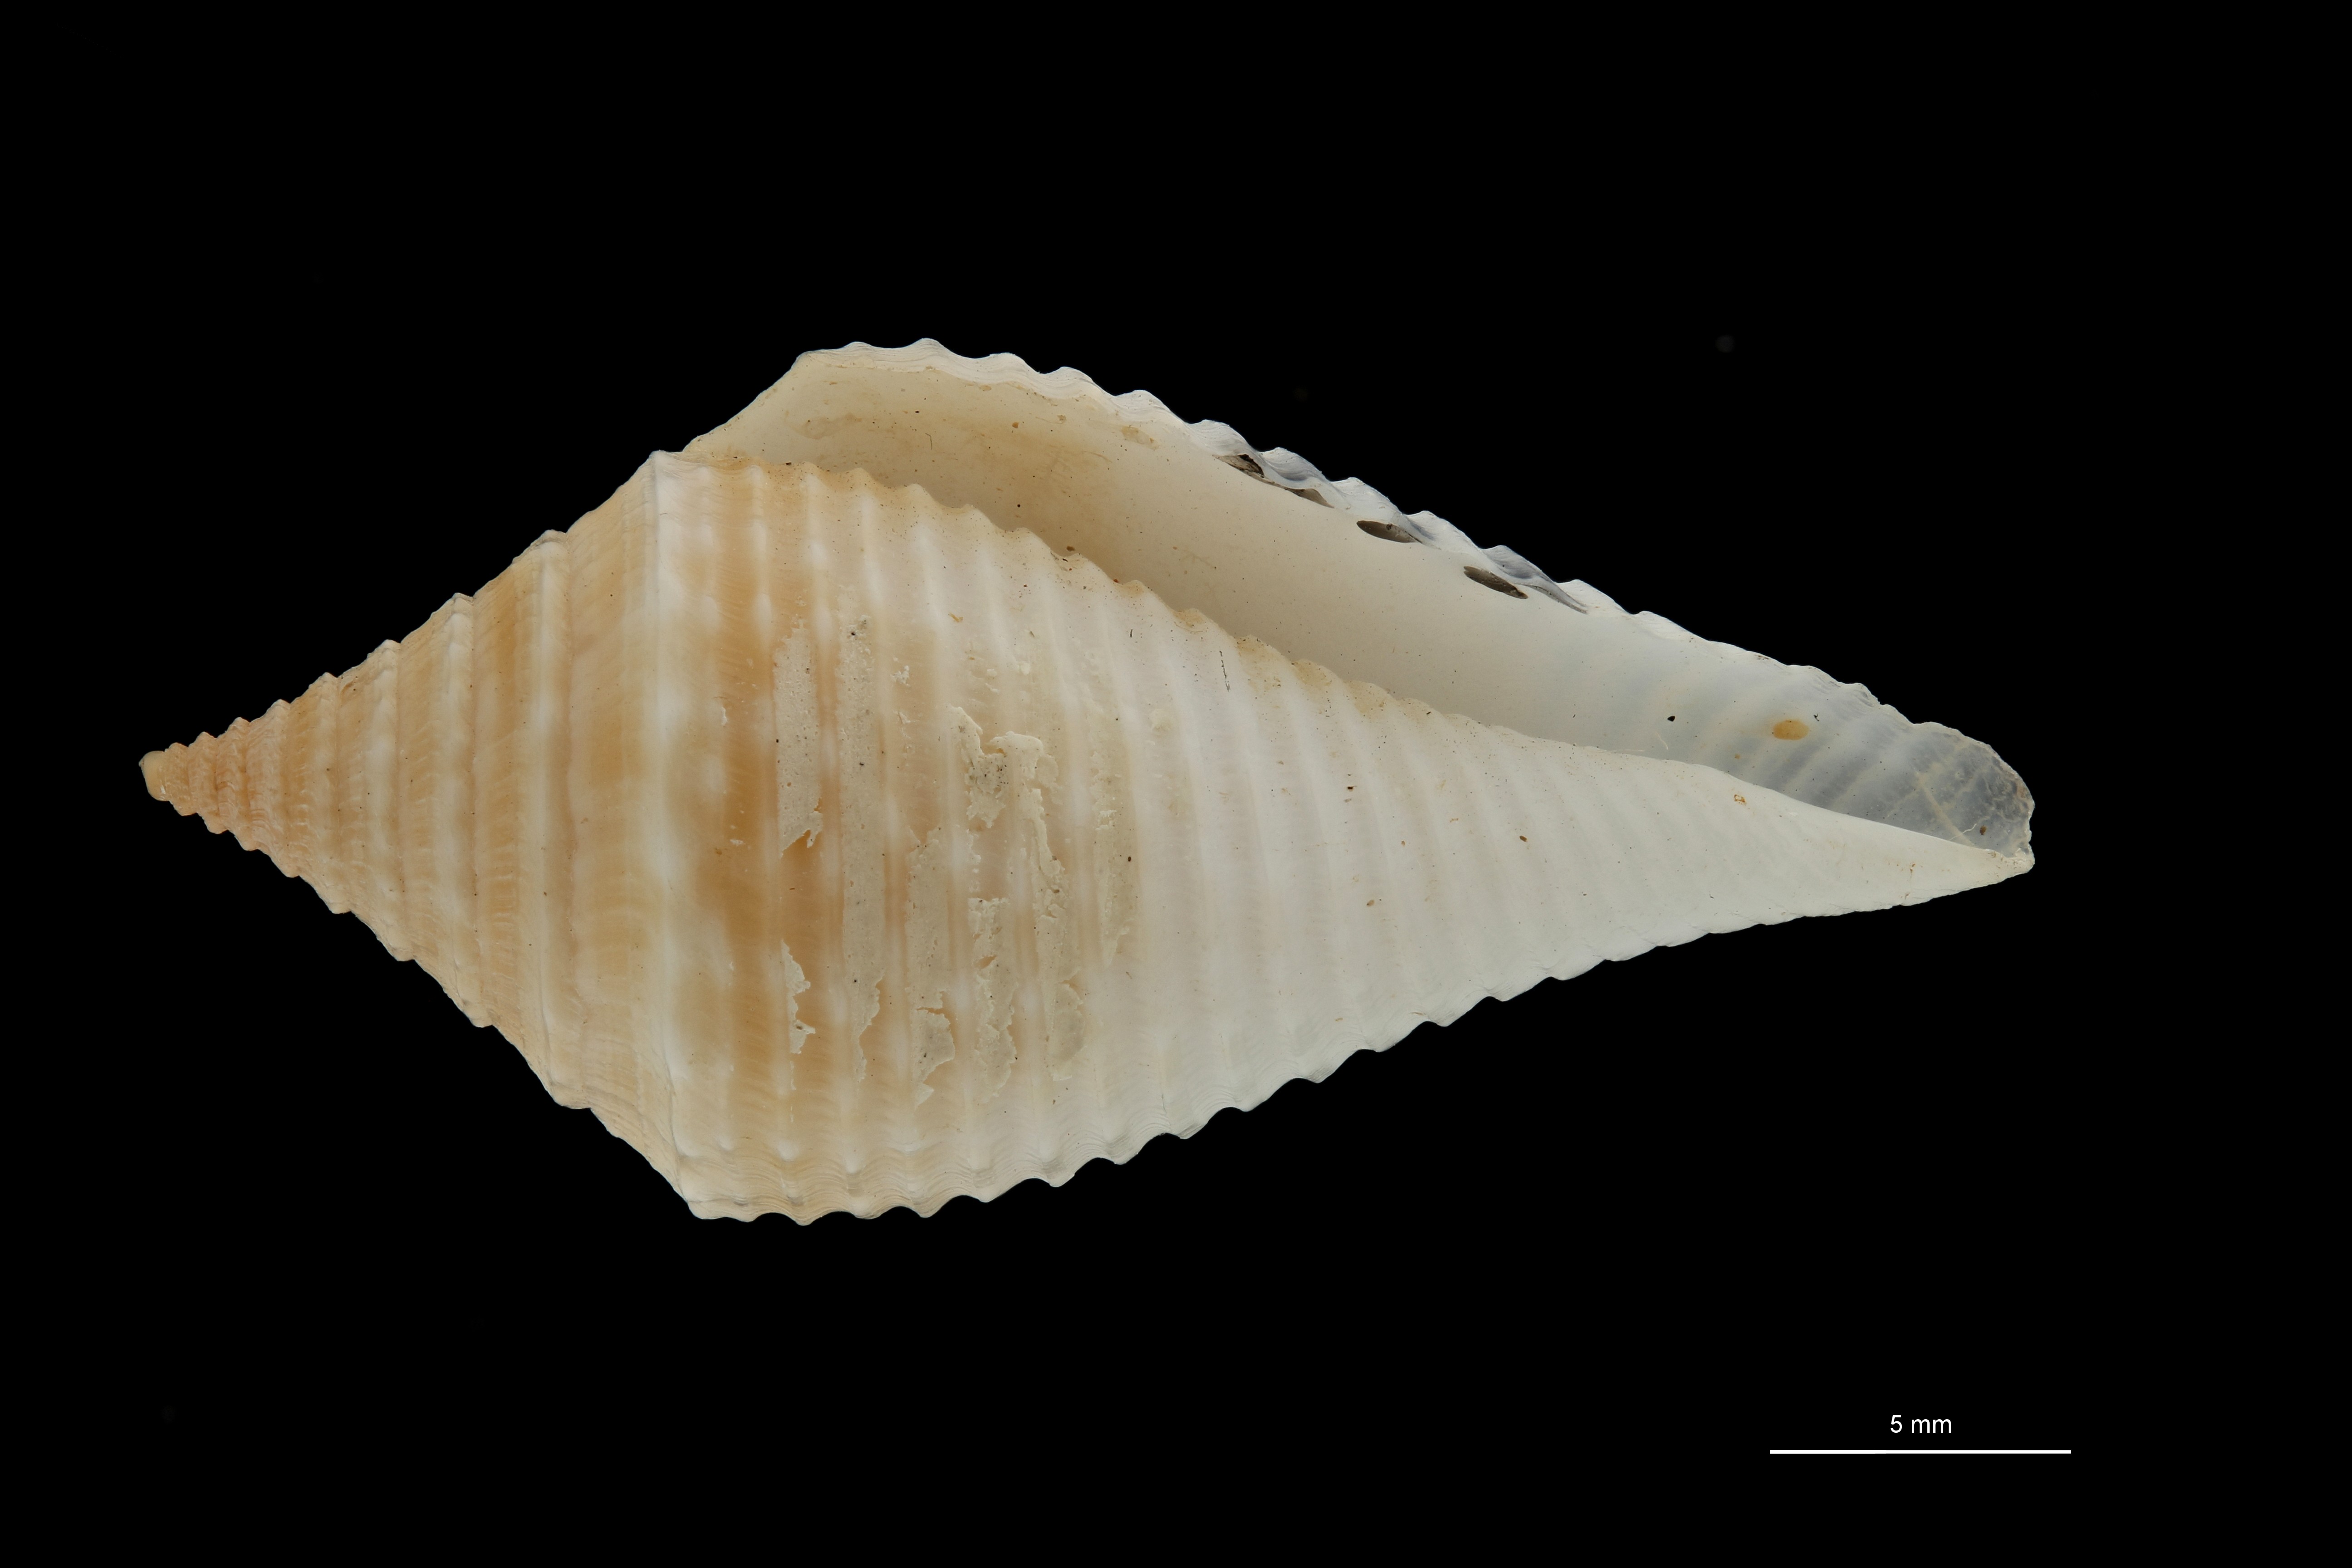 BE-RBINS-INV PARATYPE MT.3052 Conus guyanensis VENTRAL ZS PMax Scaled.jpg